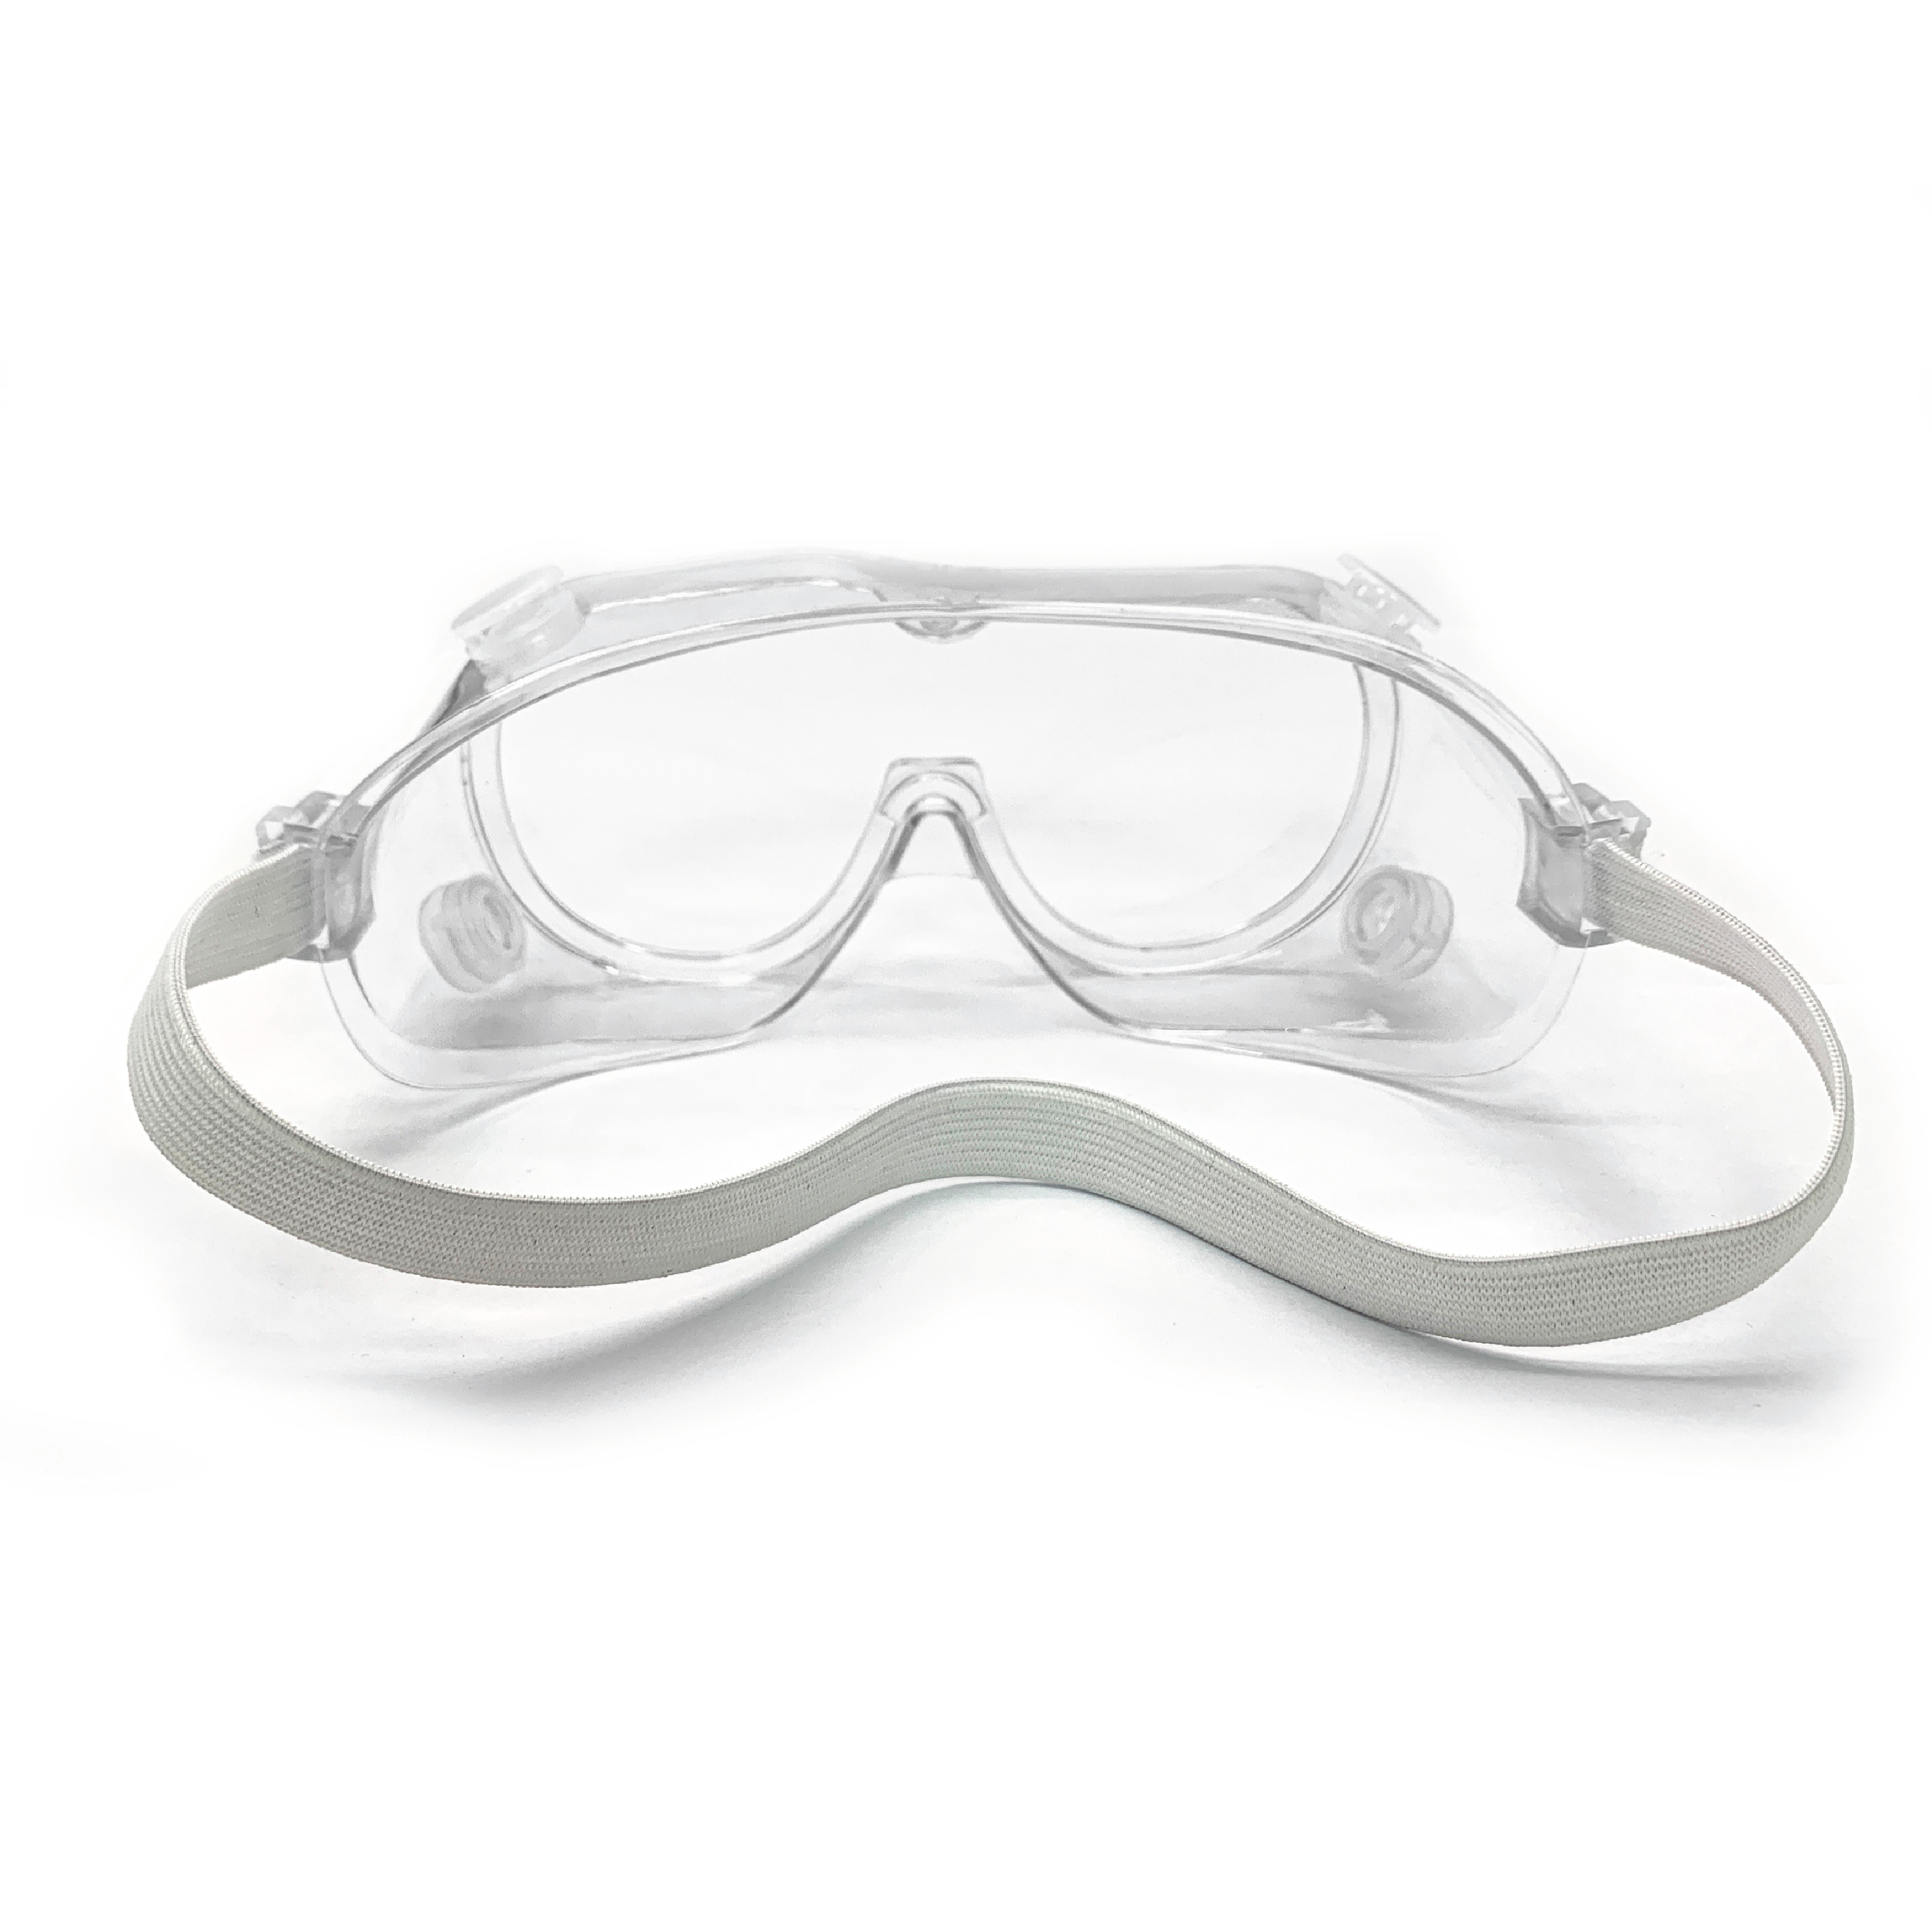 Zak Personal Protective Equipment (PPE) Protective Goggles, Clear, 2-piece set slideshow image 3